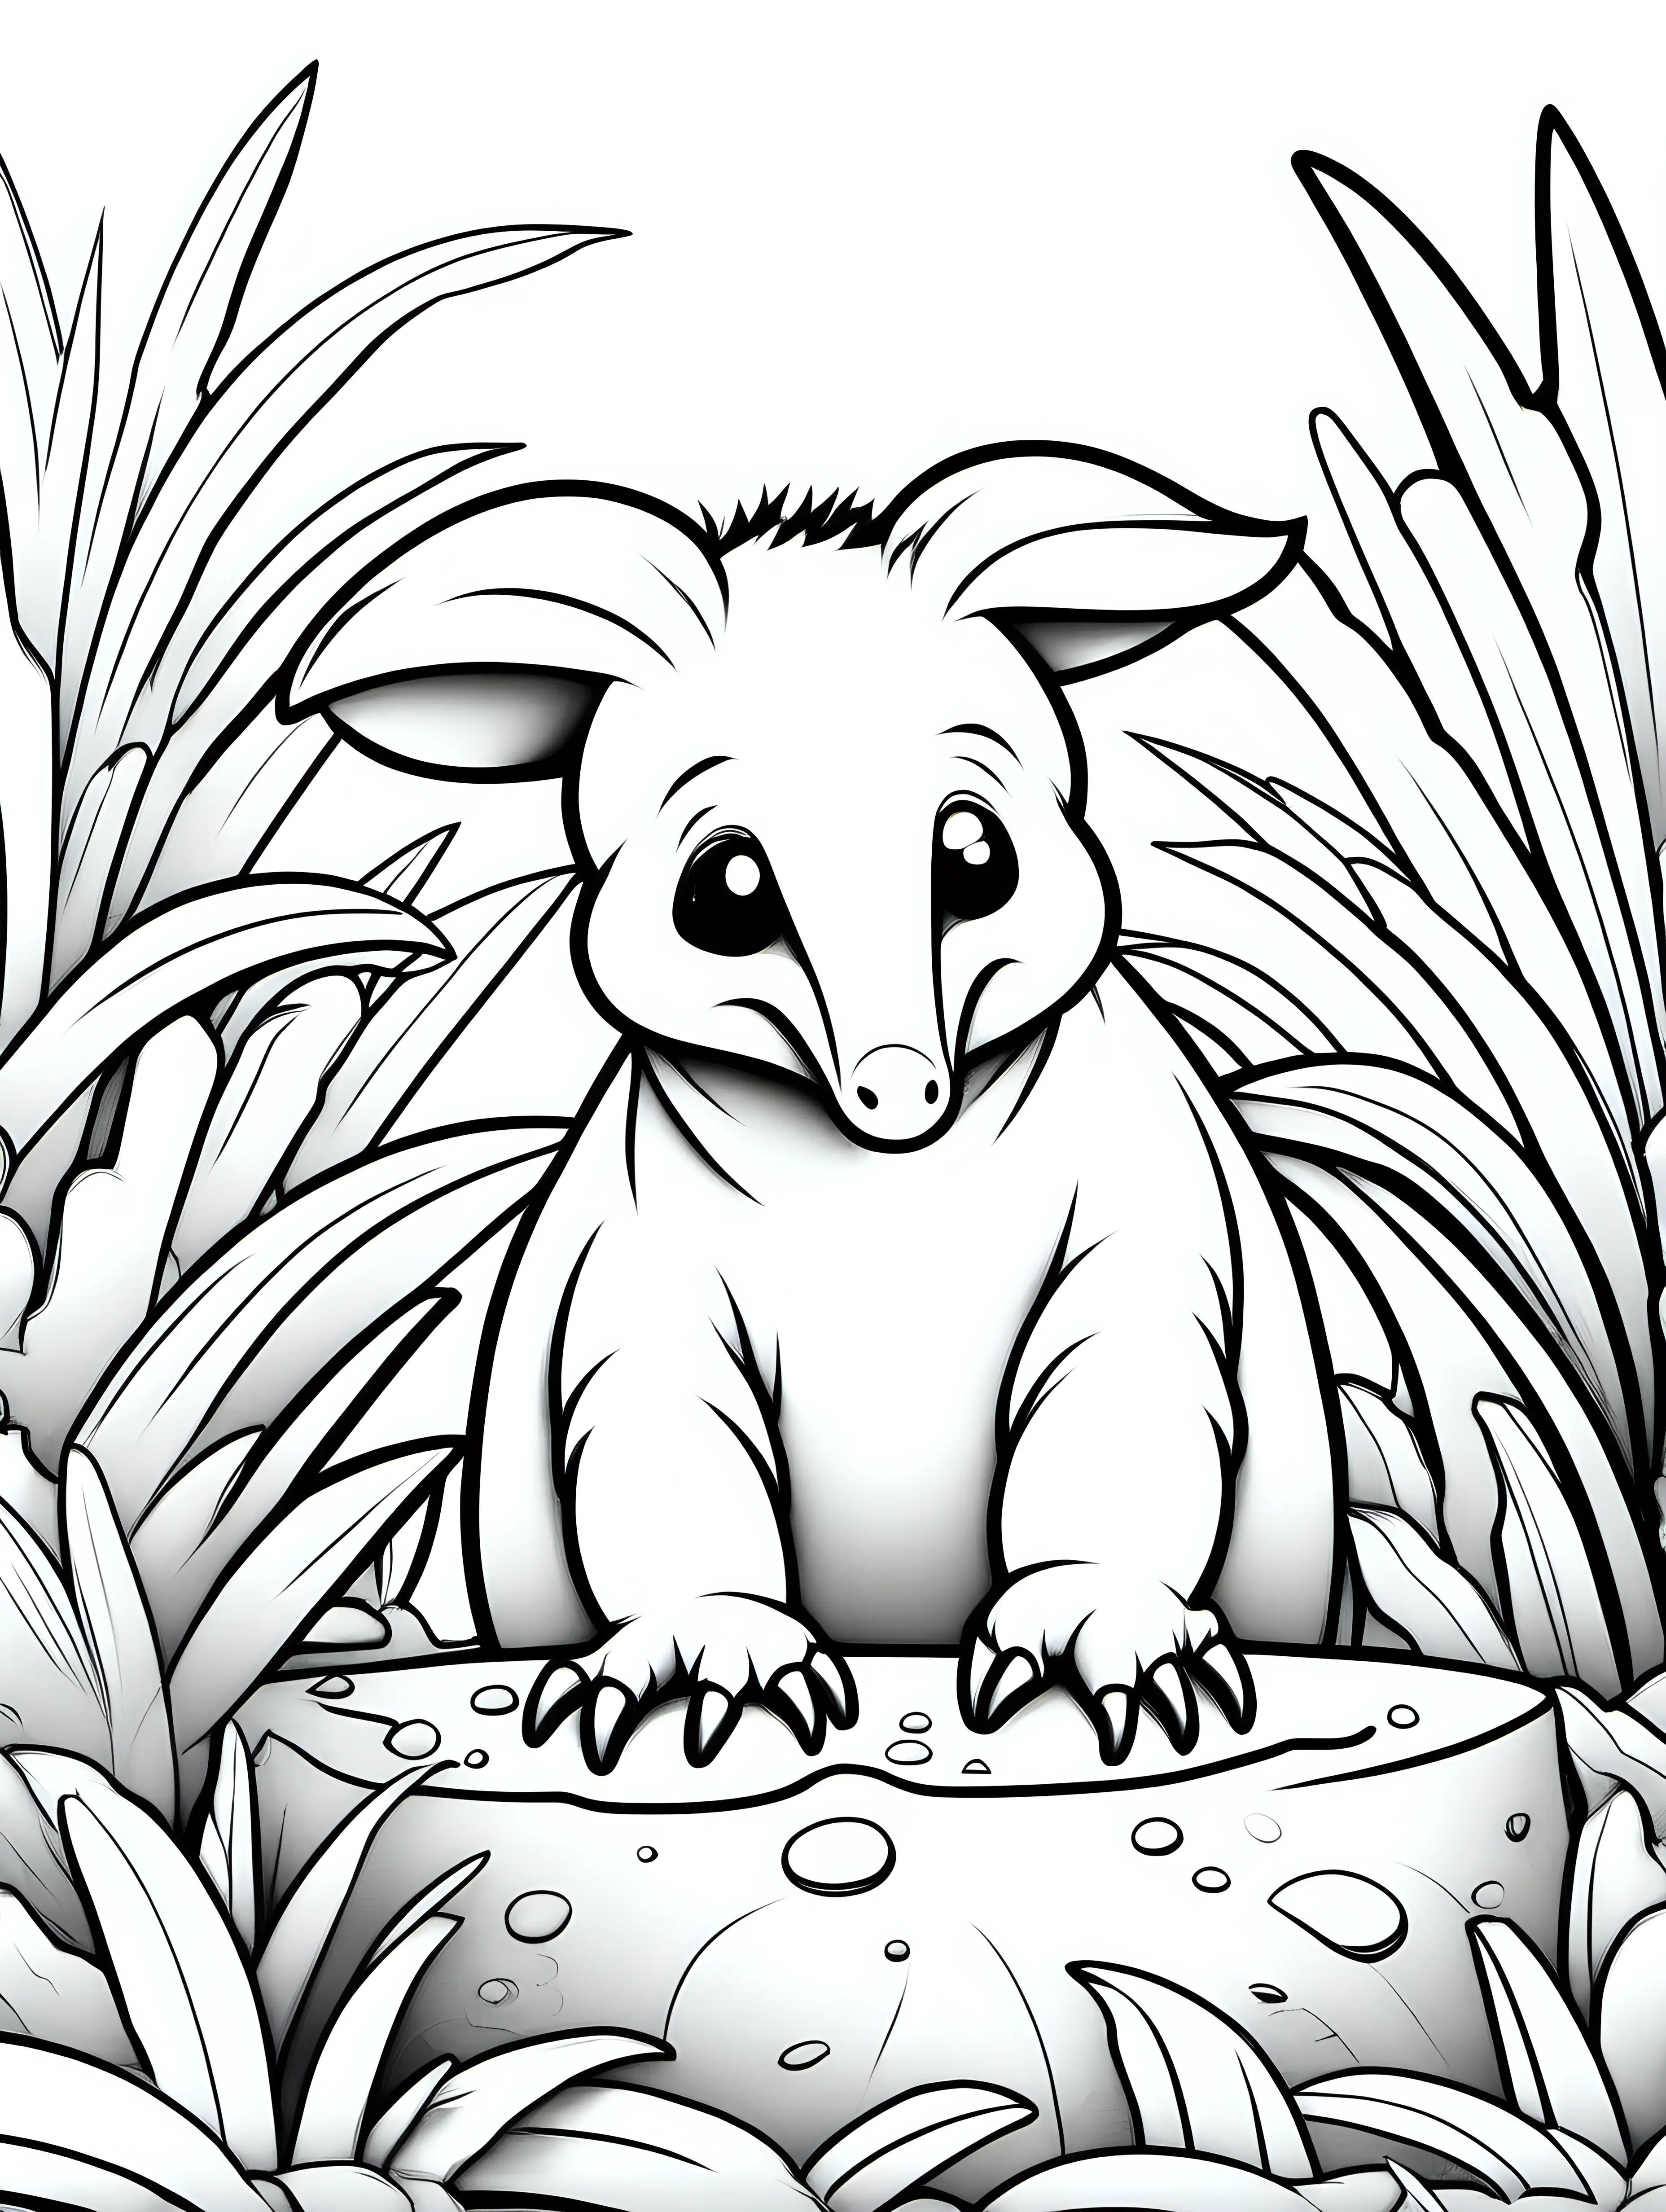 Coloring book, cartoon drawing, clean black and white, single line, in center of aspect ratio 9:16, white background, cute anteater cub slurping up ants with its long tongue.